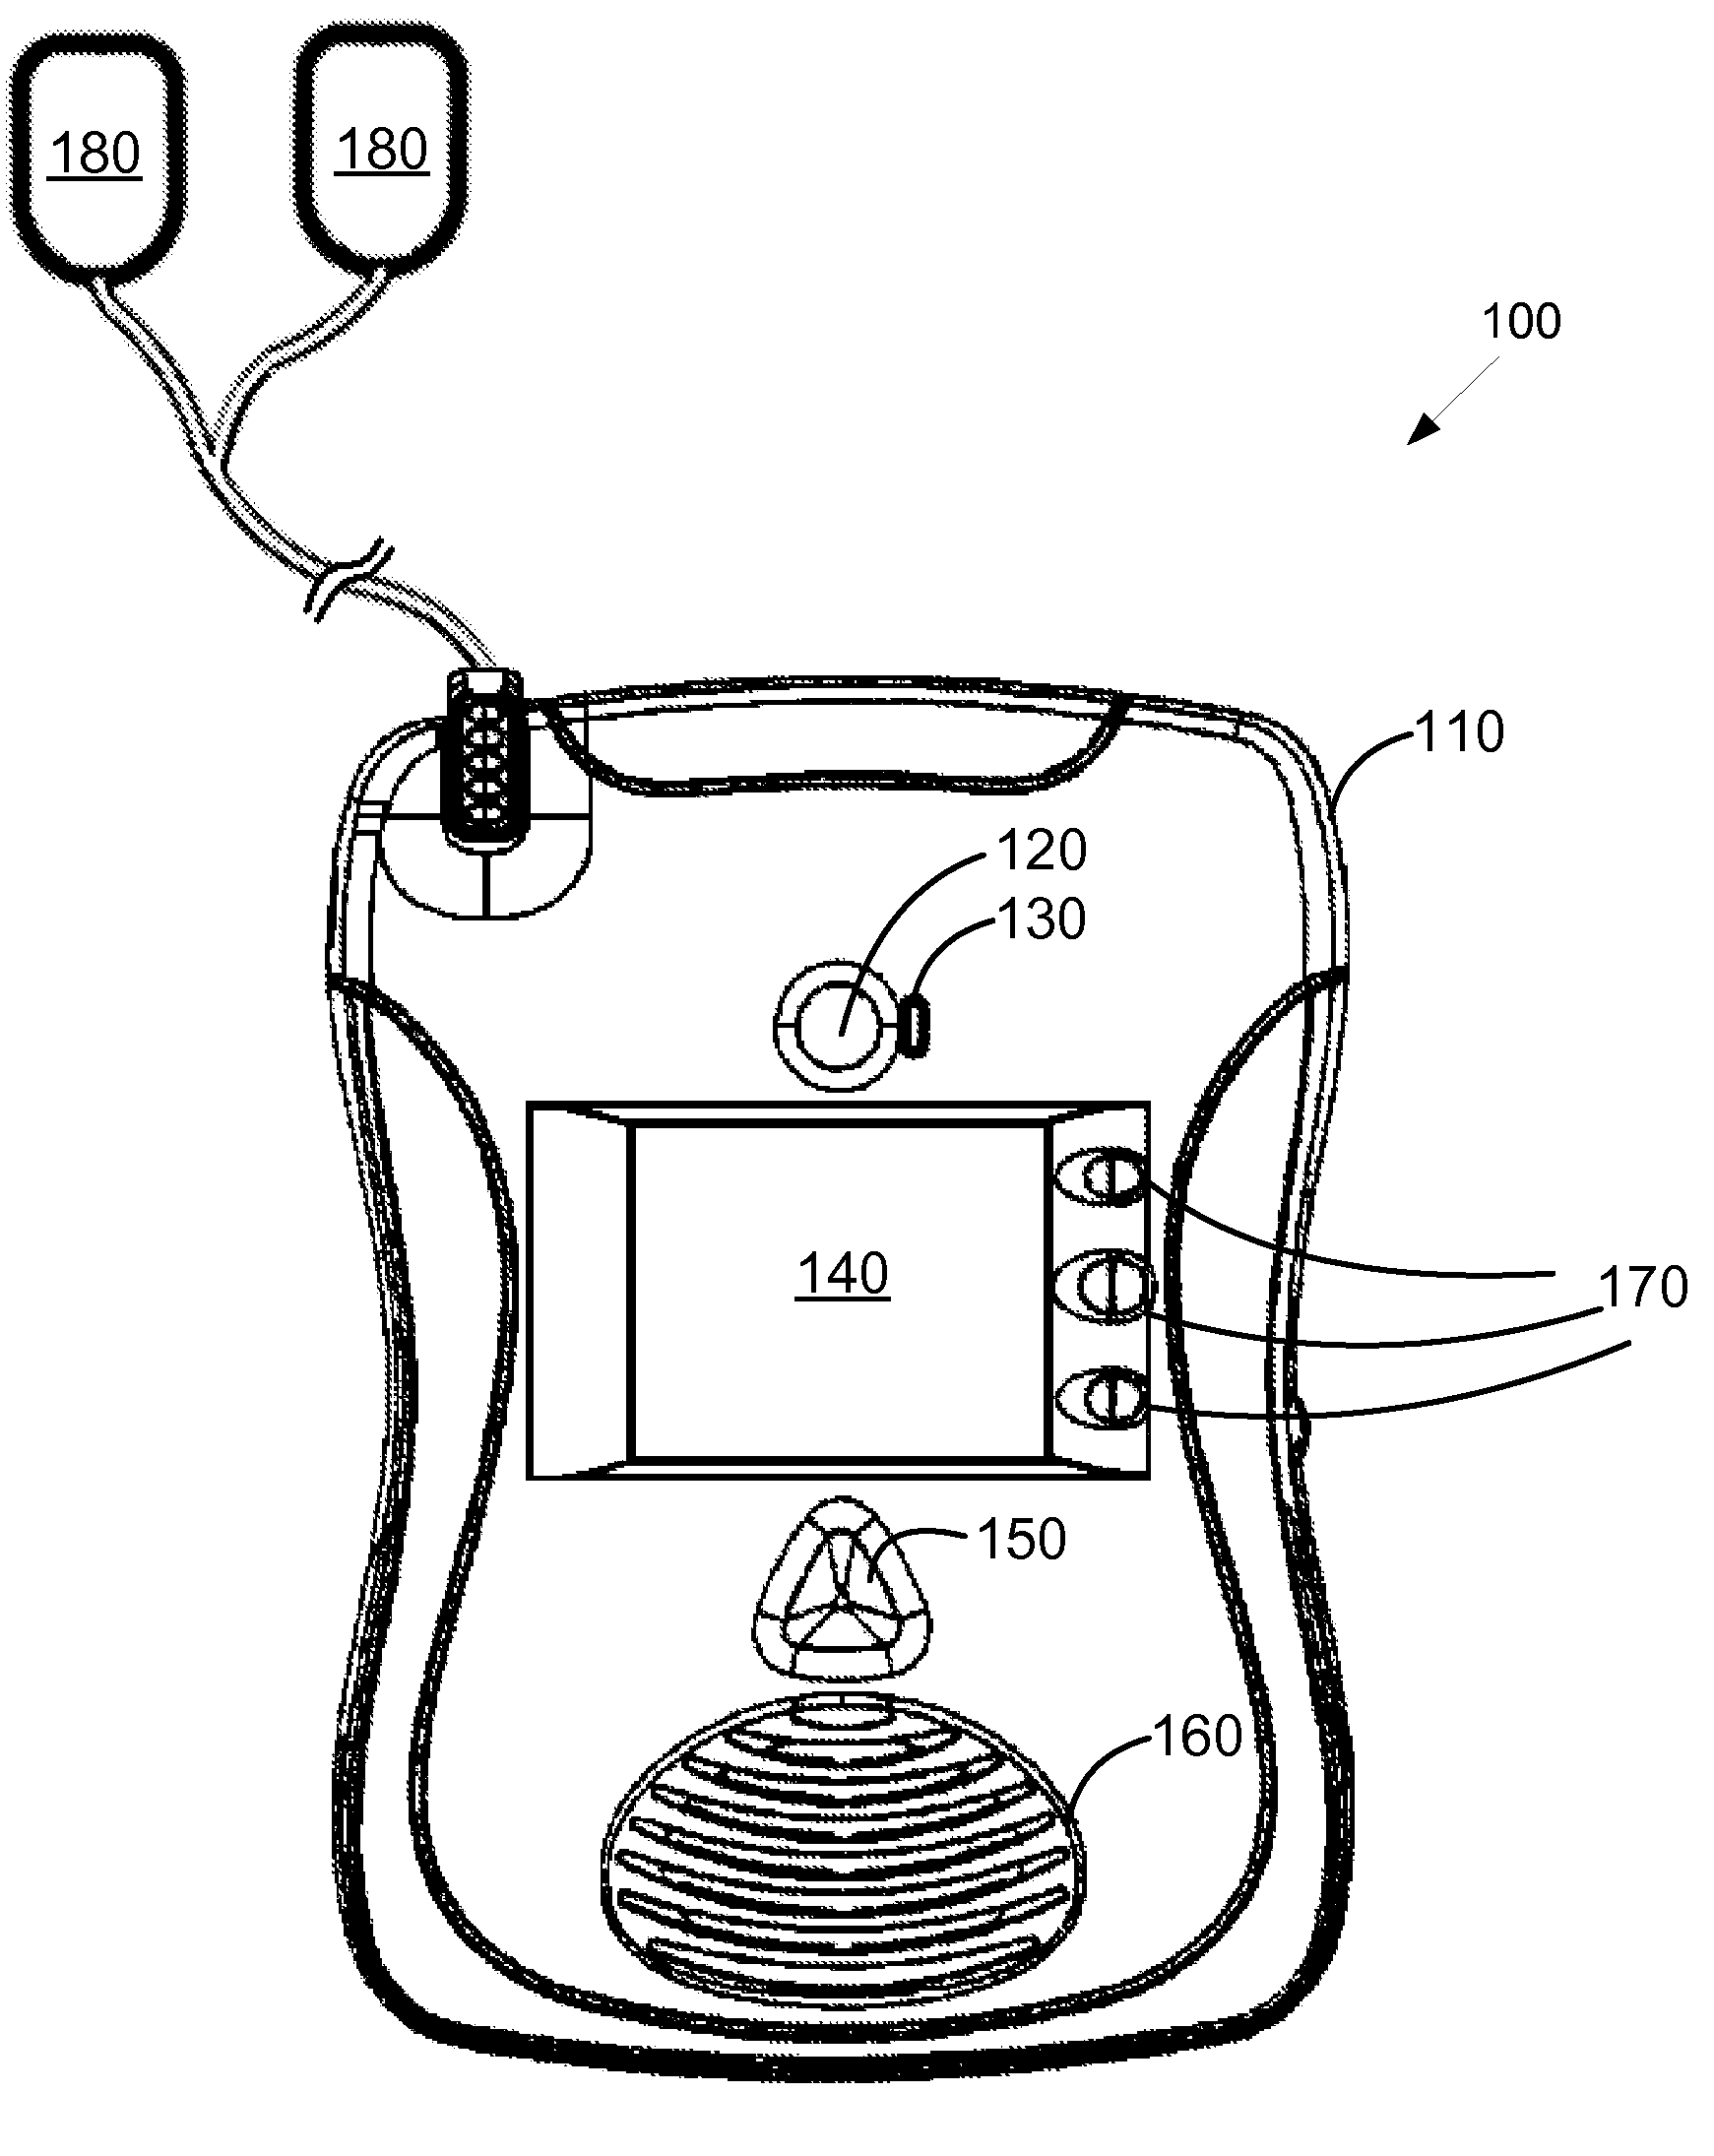 System and Method for Conditioning a Lithium Battery in an Automatic External Defibrillator